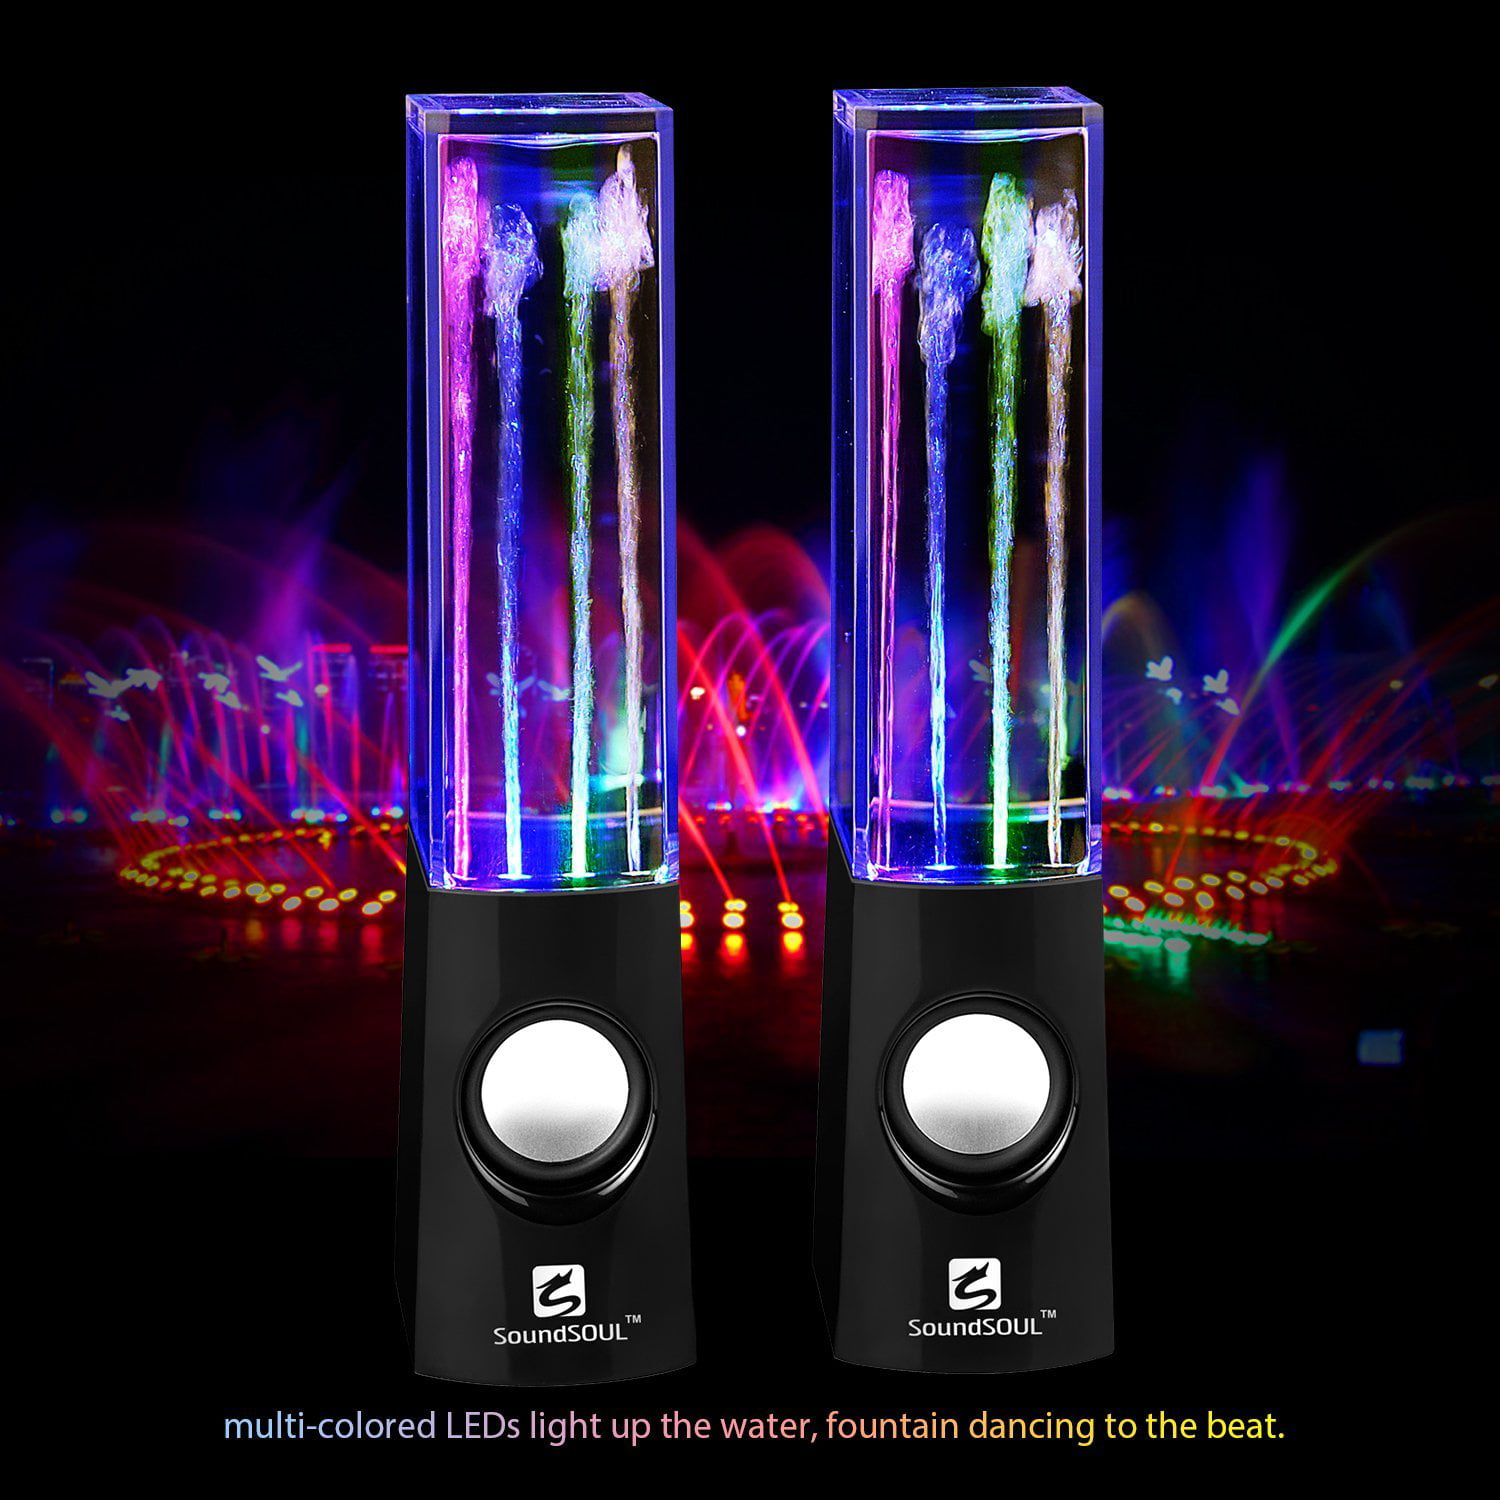 New in Box Dancing LED Water Speakers with White Base